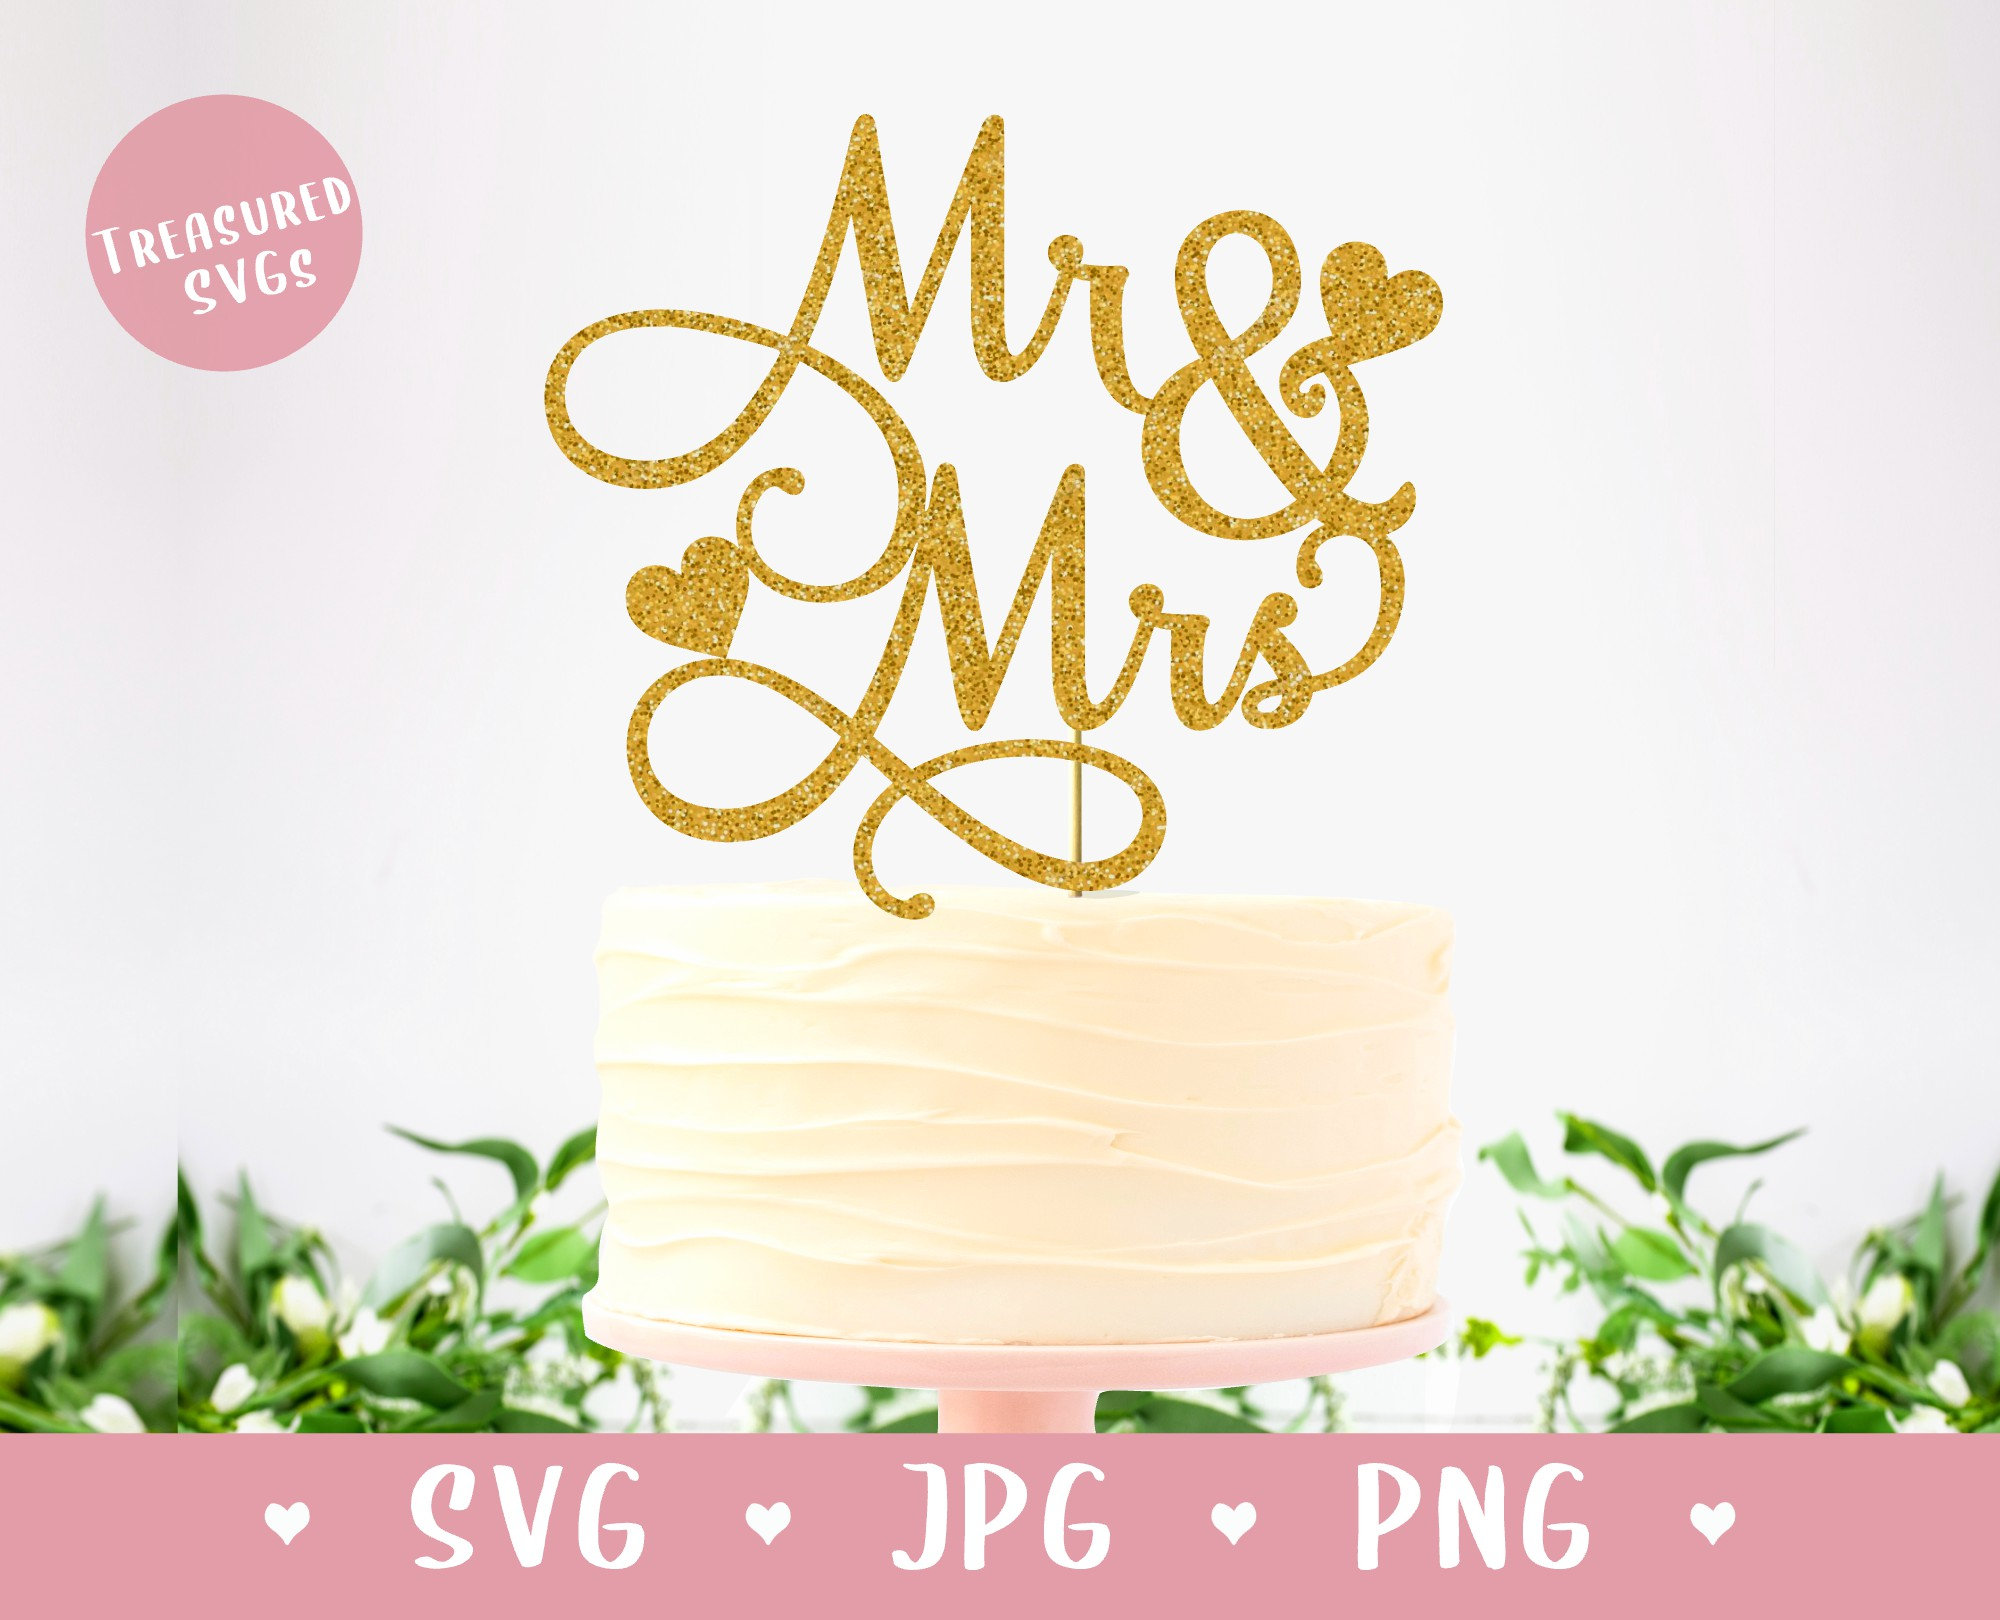 Wedding Cake Topper - Mr & Mrs Personalized Date - Fast Shipping! –  VividEditions